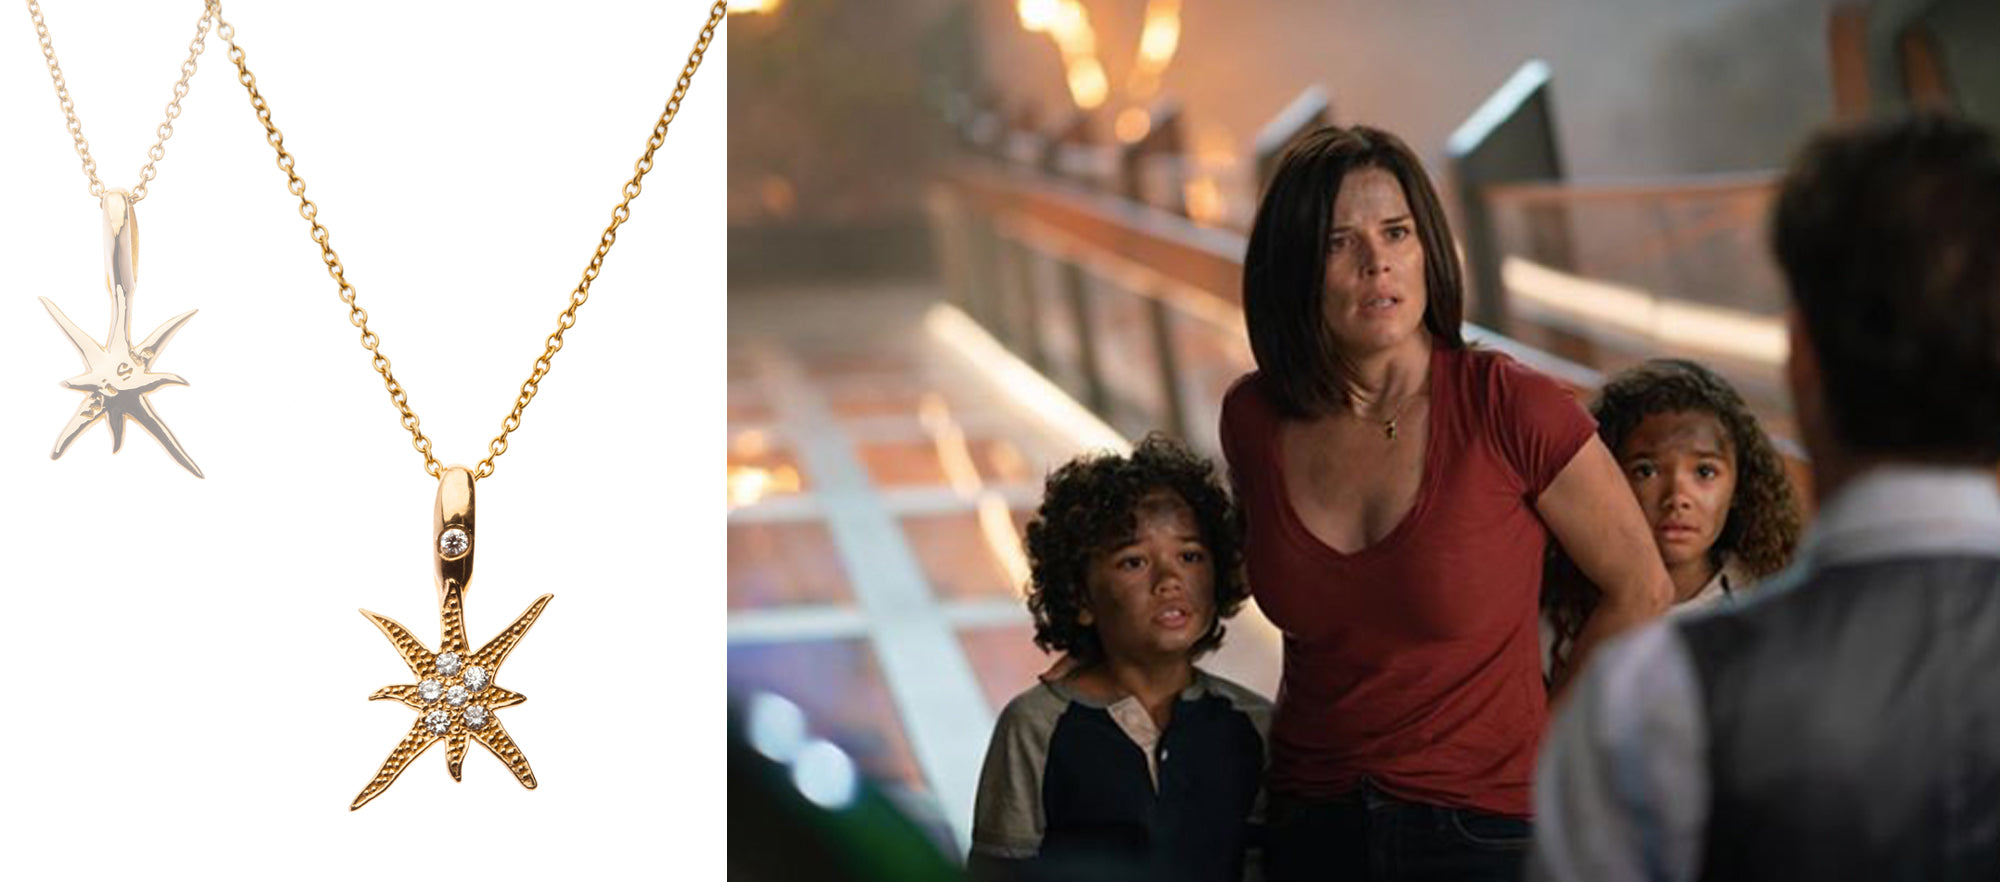 The Necklace Worn by Neve Campbell's character in the Summer Blockbuster Movie Skyscraper is a Star!